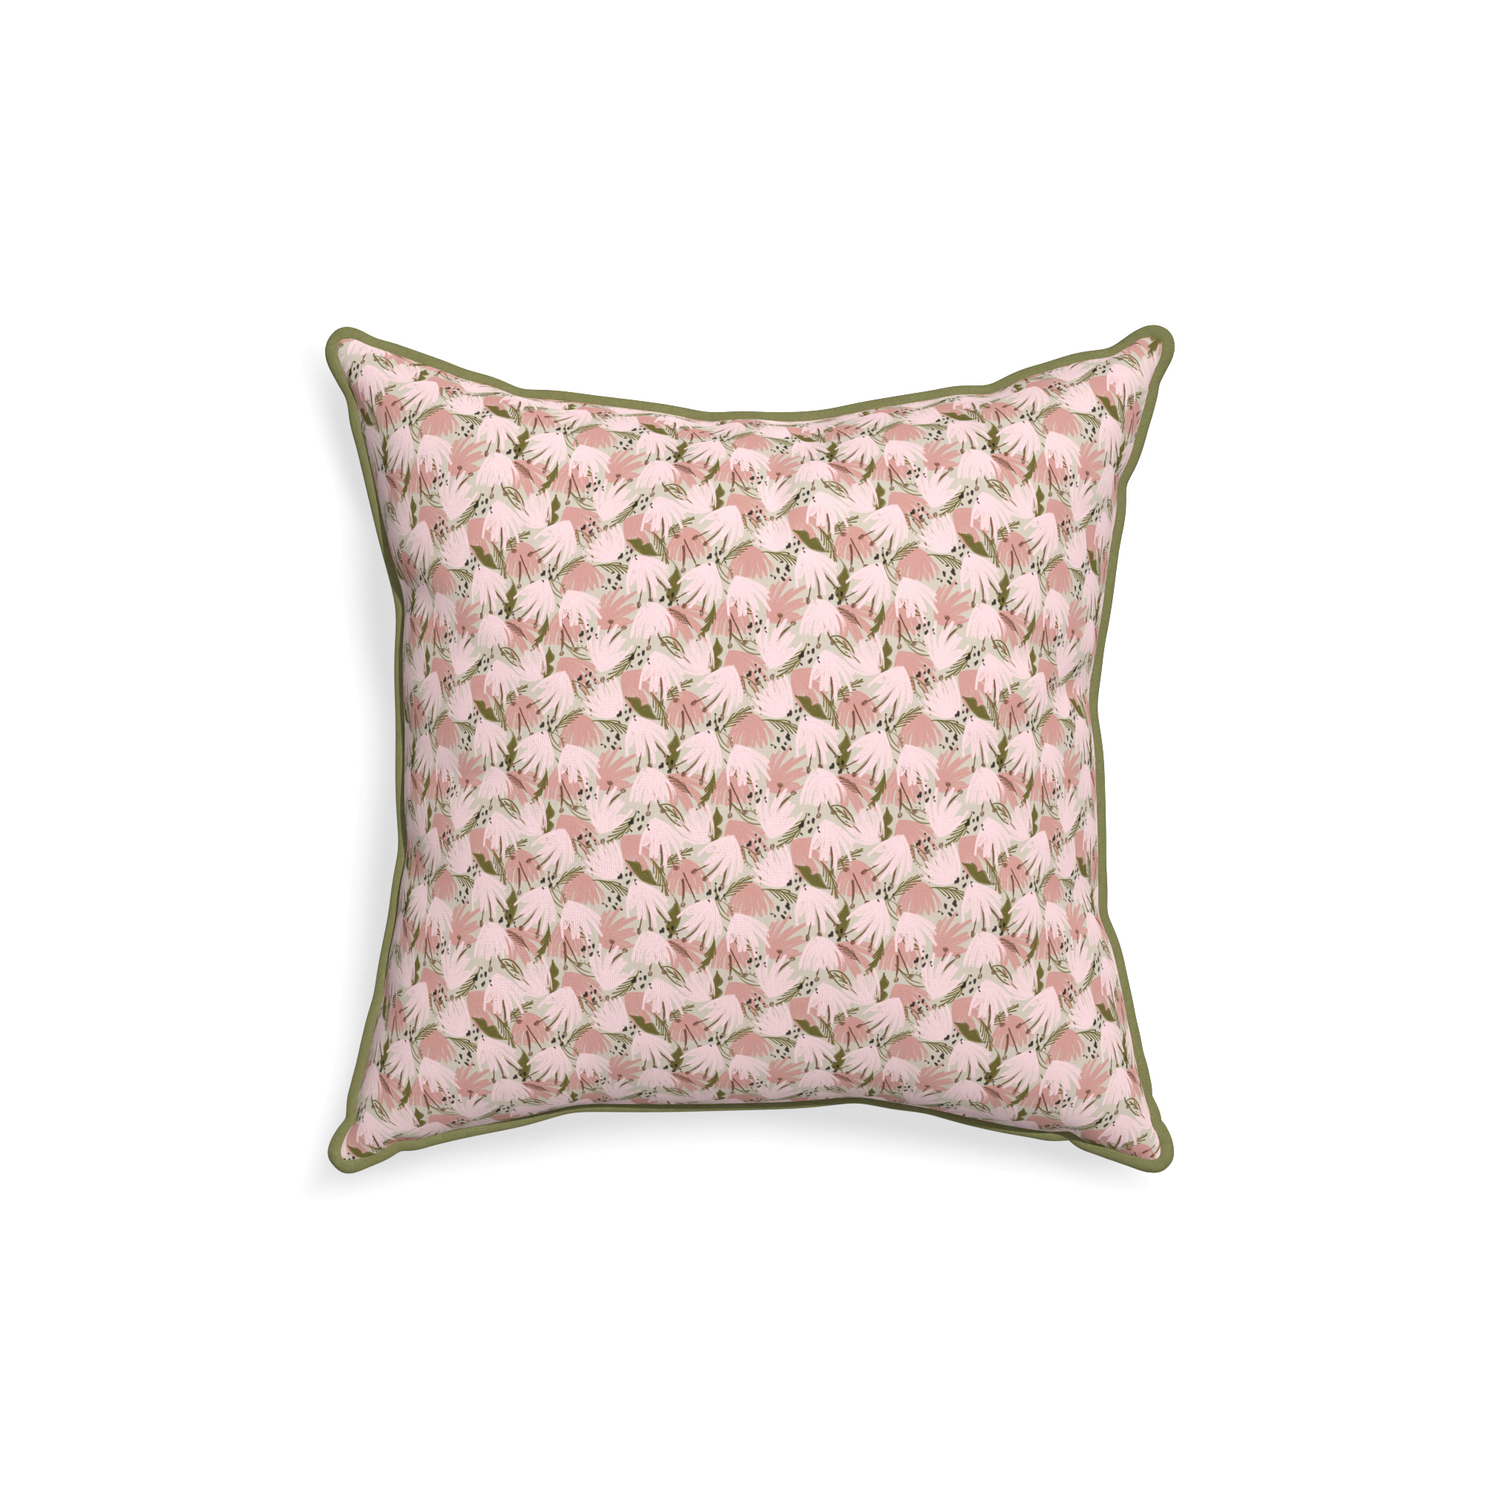 18-square eden pink custom pillow with moss piping on white background